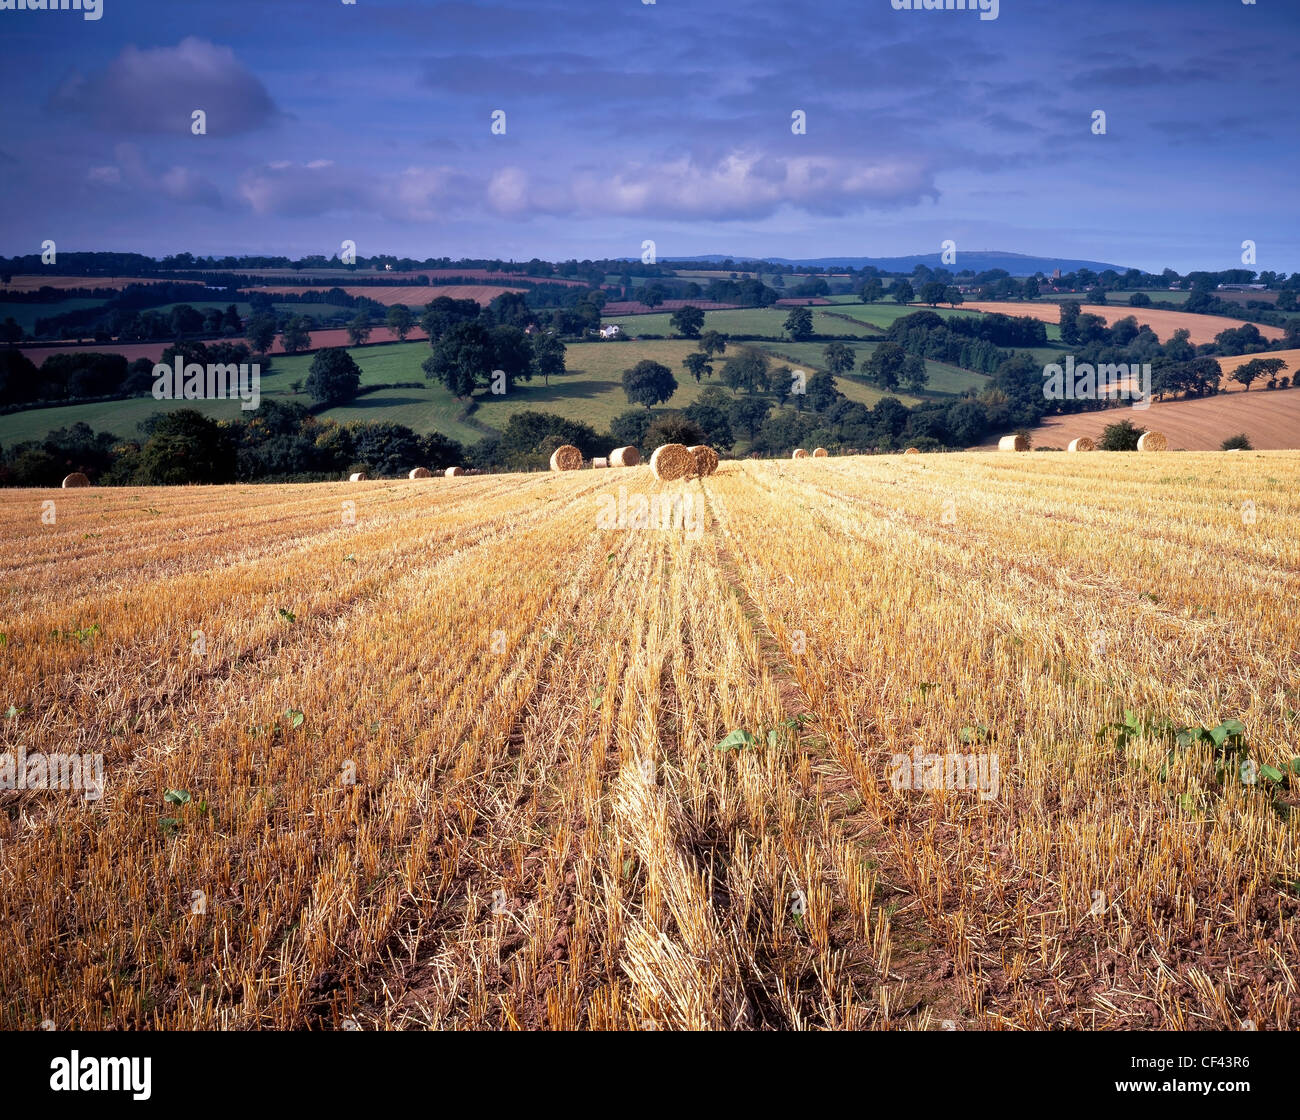 Looking across a harvested hay field in Shropshire towards rolling hills. Stock Photo